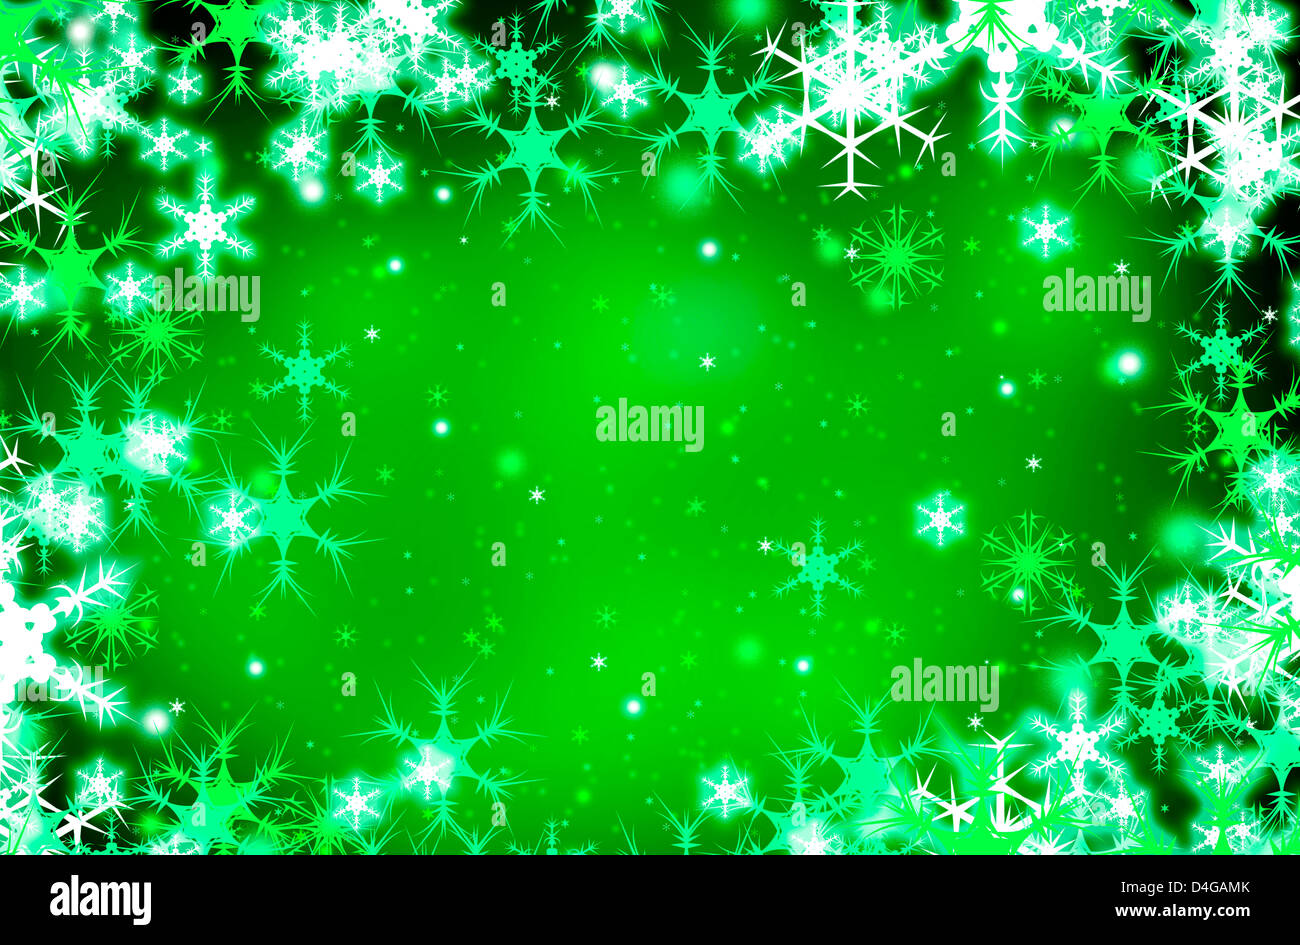 Green Christmas background textured with flakes of snow Stock Photo